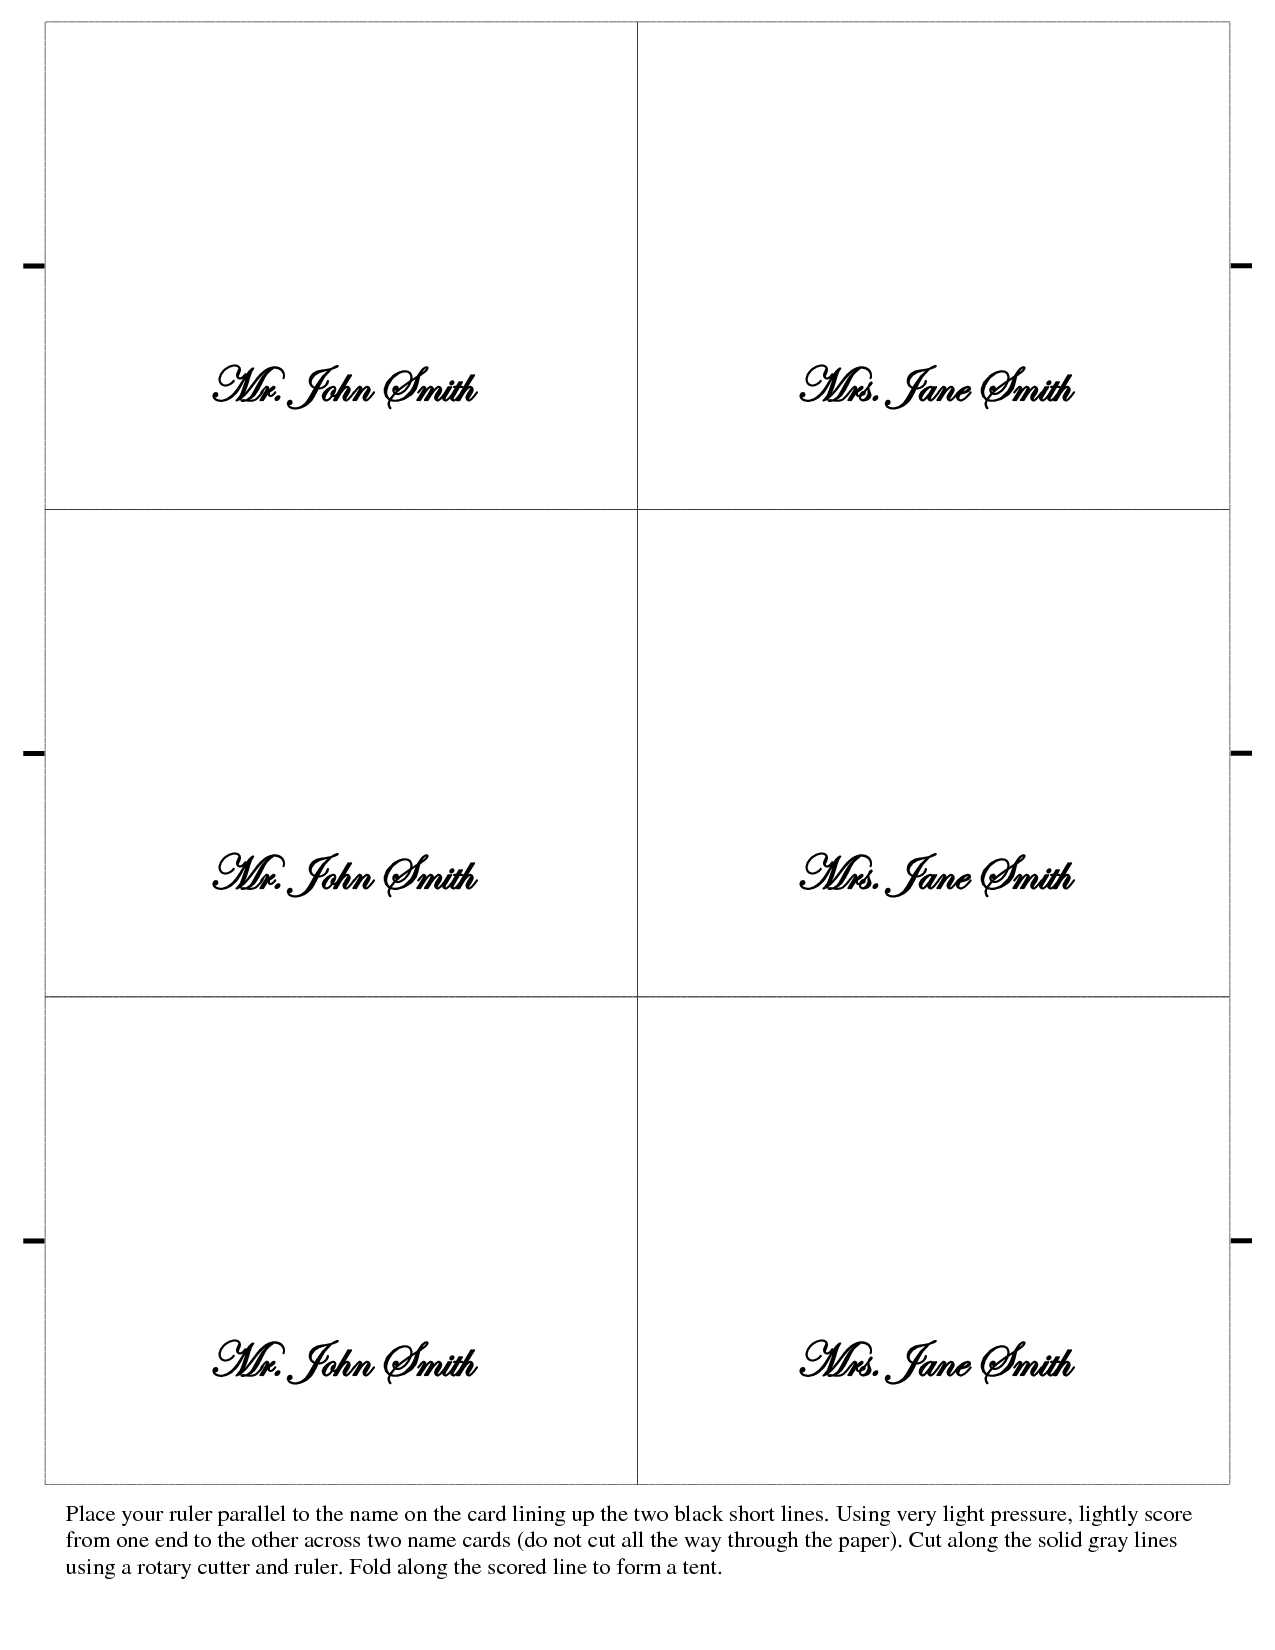 Free Place Card Templates 6 Per Page – Atlantaauctionco Regarding Free Place Card Templates 6 Per Page